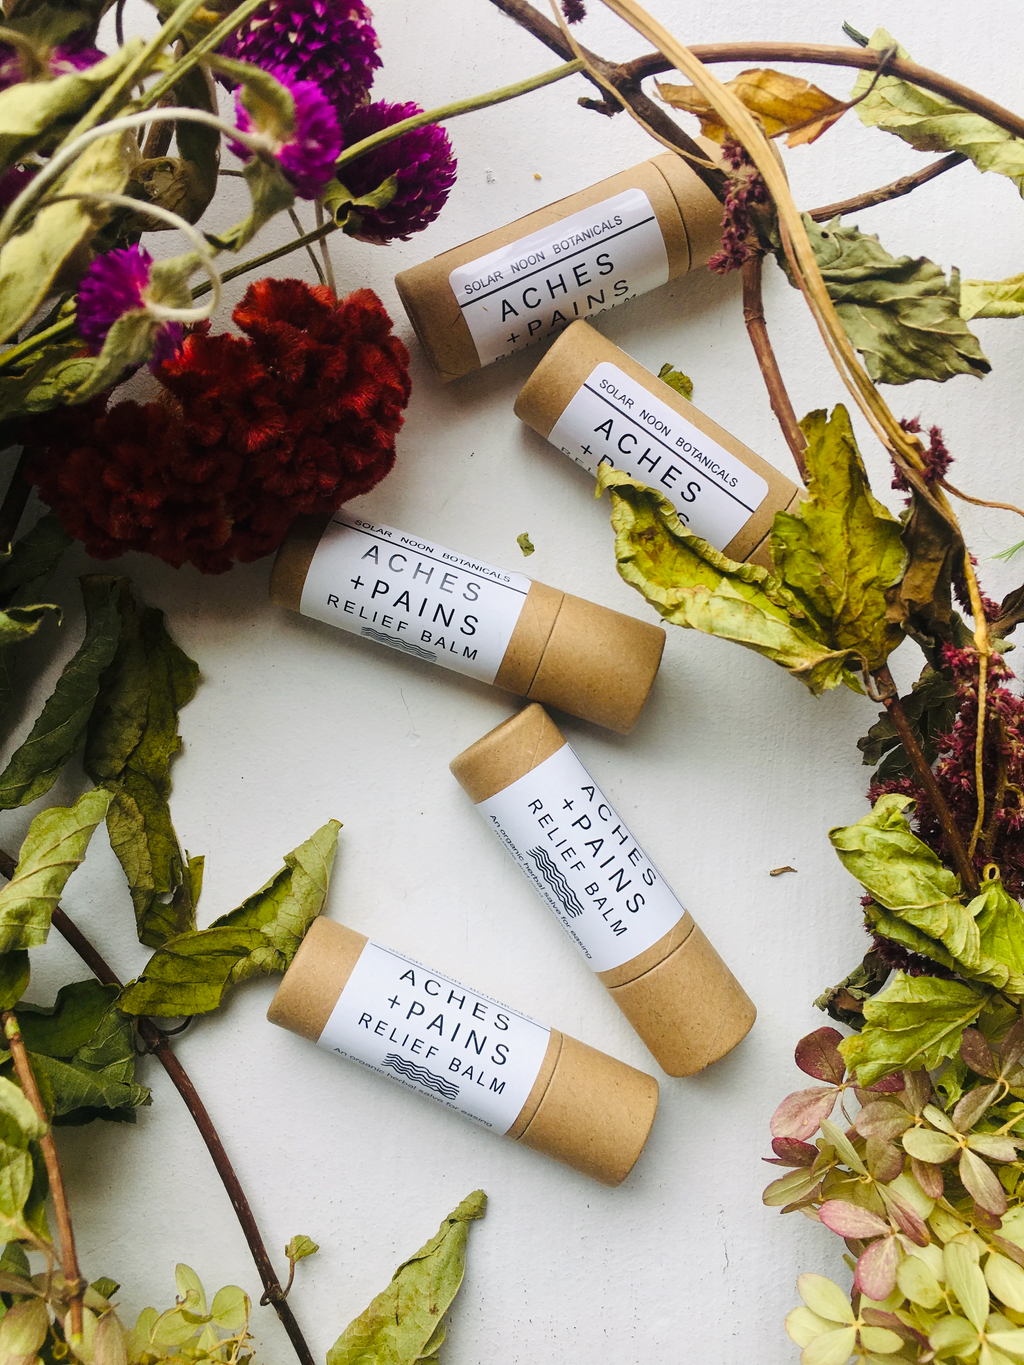 Aches + Pains Relief Balm by Solar Noon Botanicals